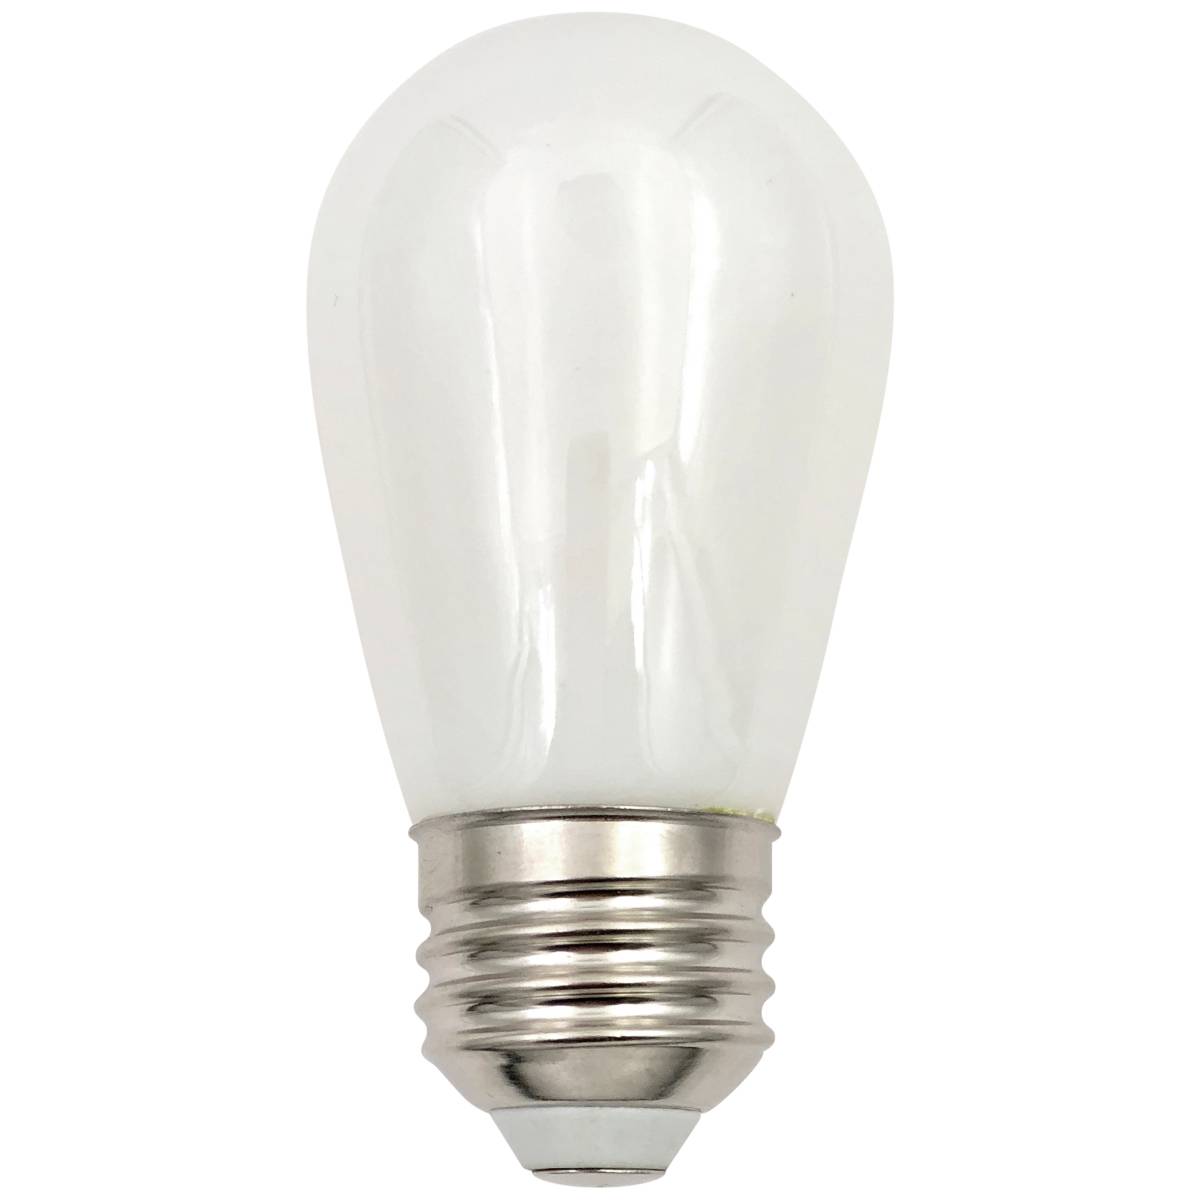 LED Light Bulbs - Replacement LED Bulb Choices - Page 3 | Lamps Plus